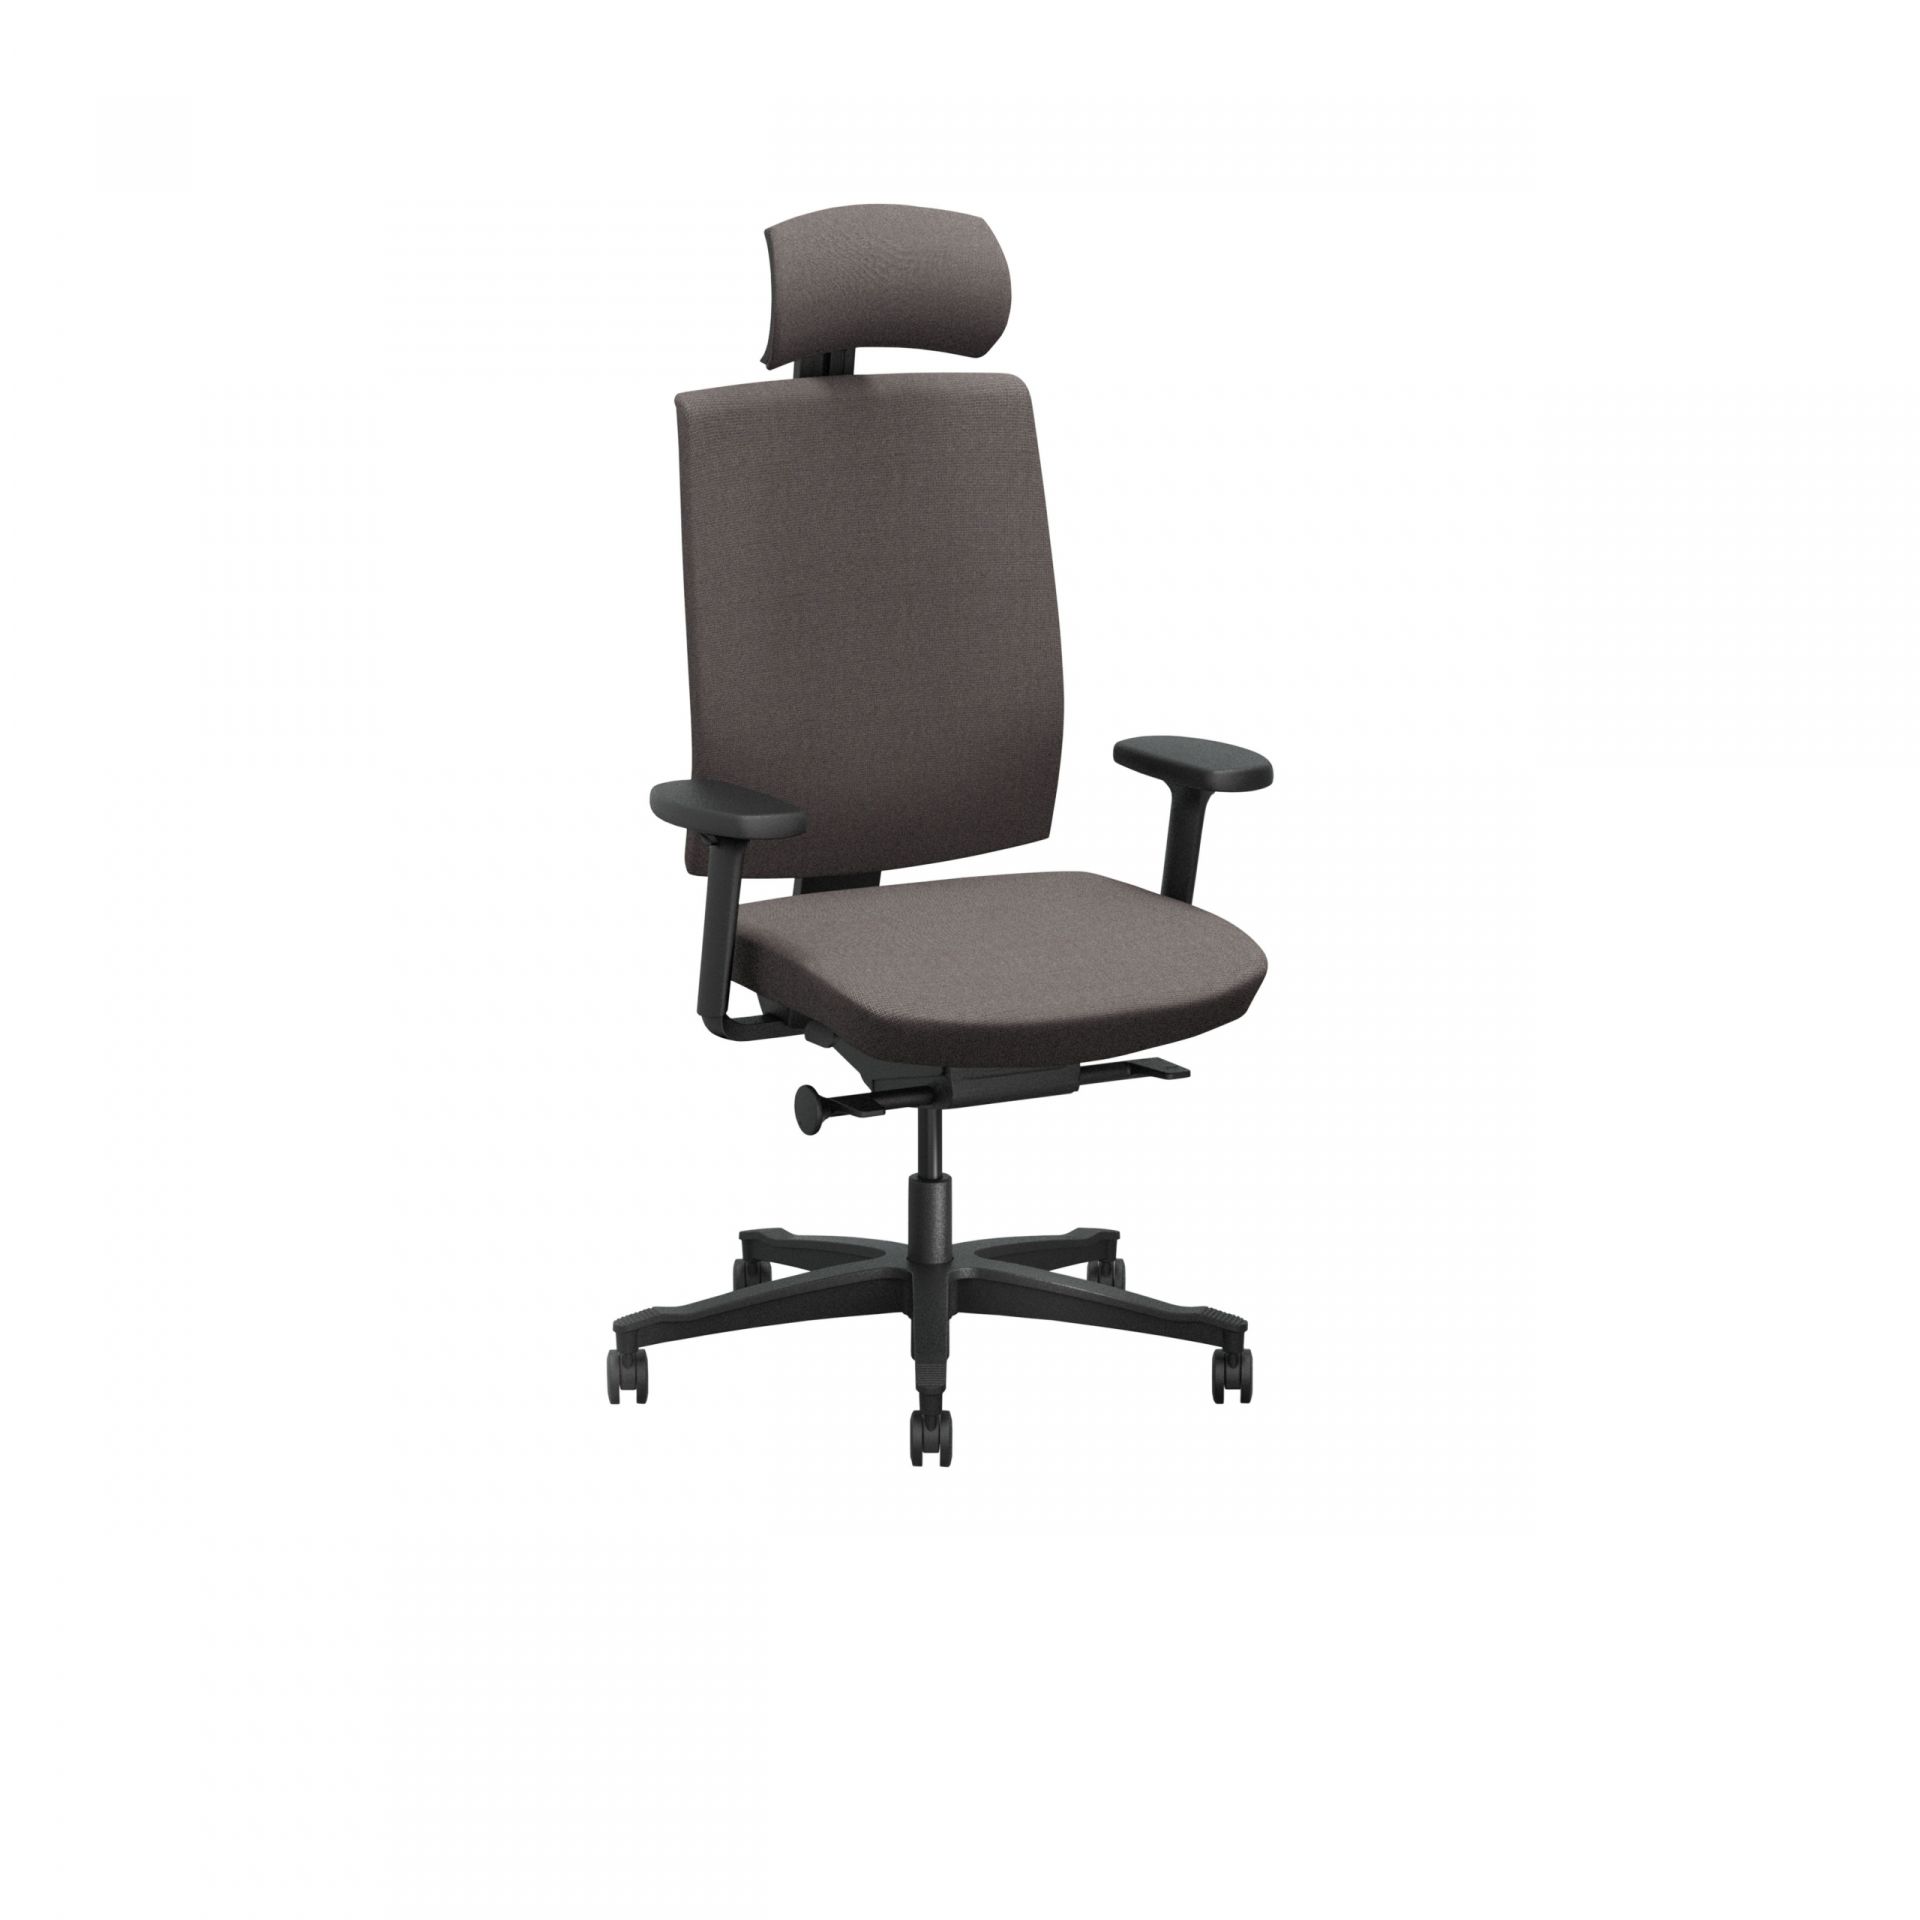 One Office chair with individual adjustments